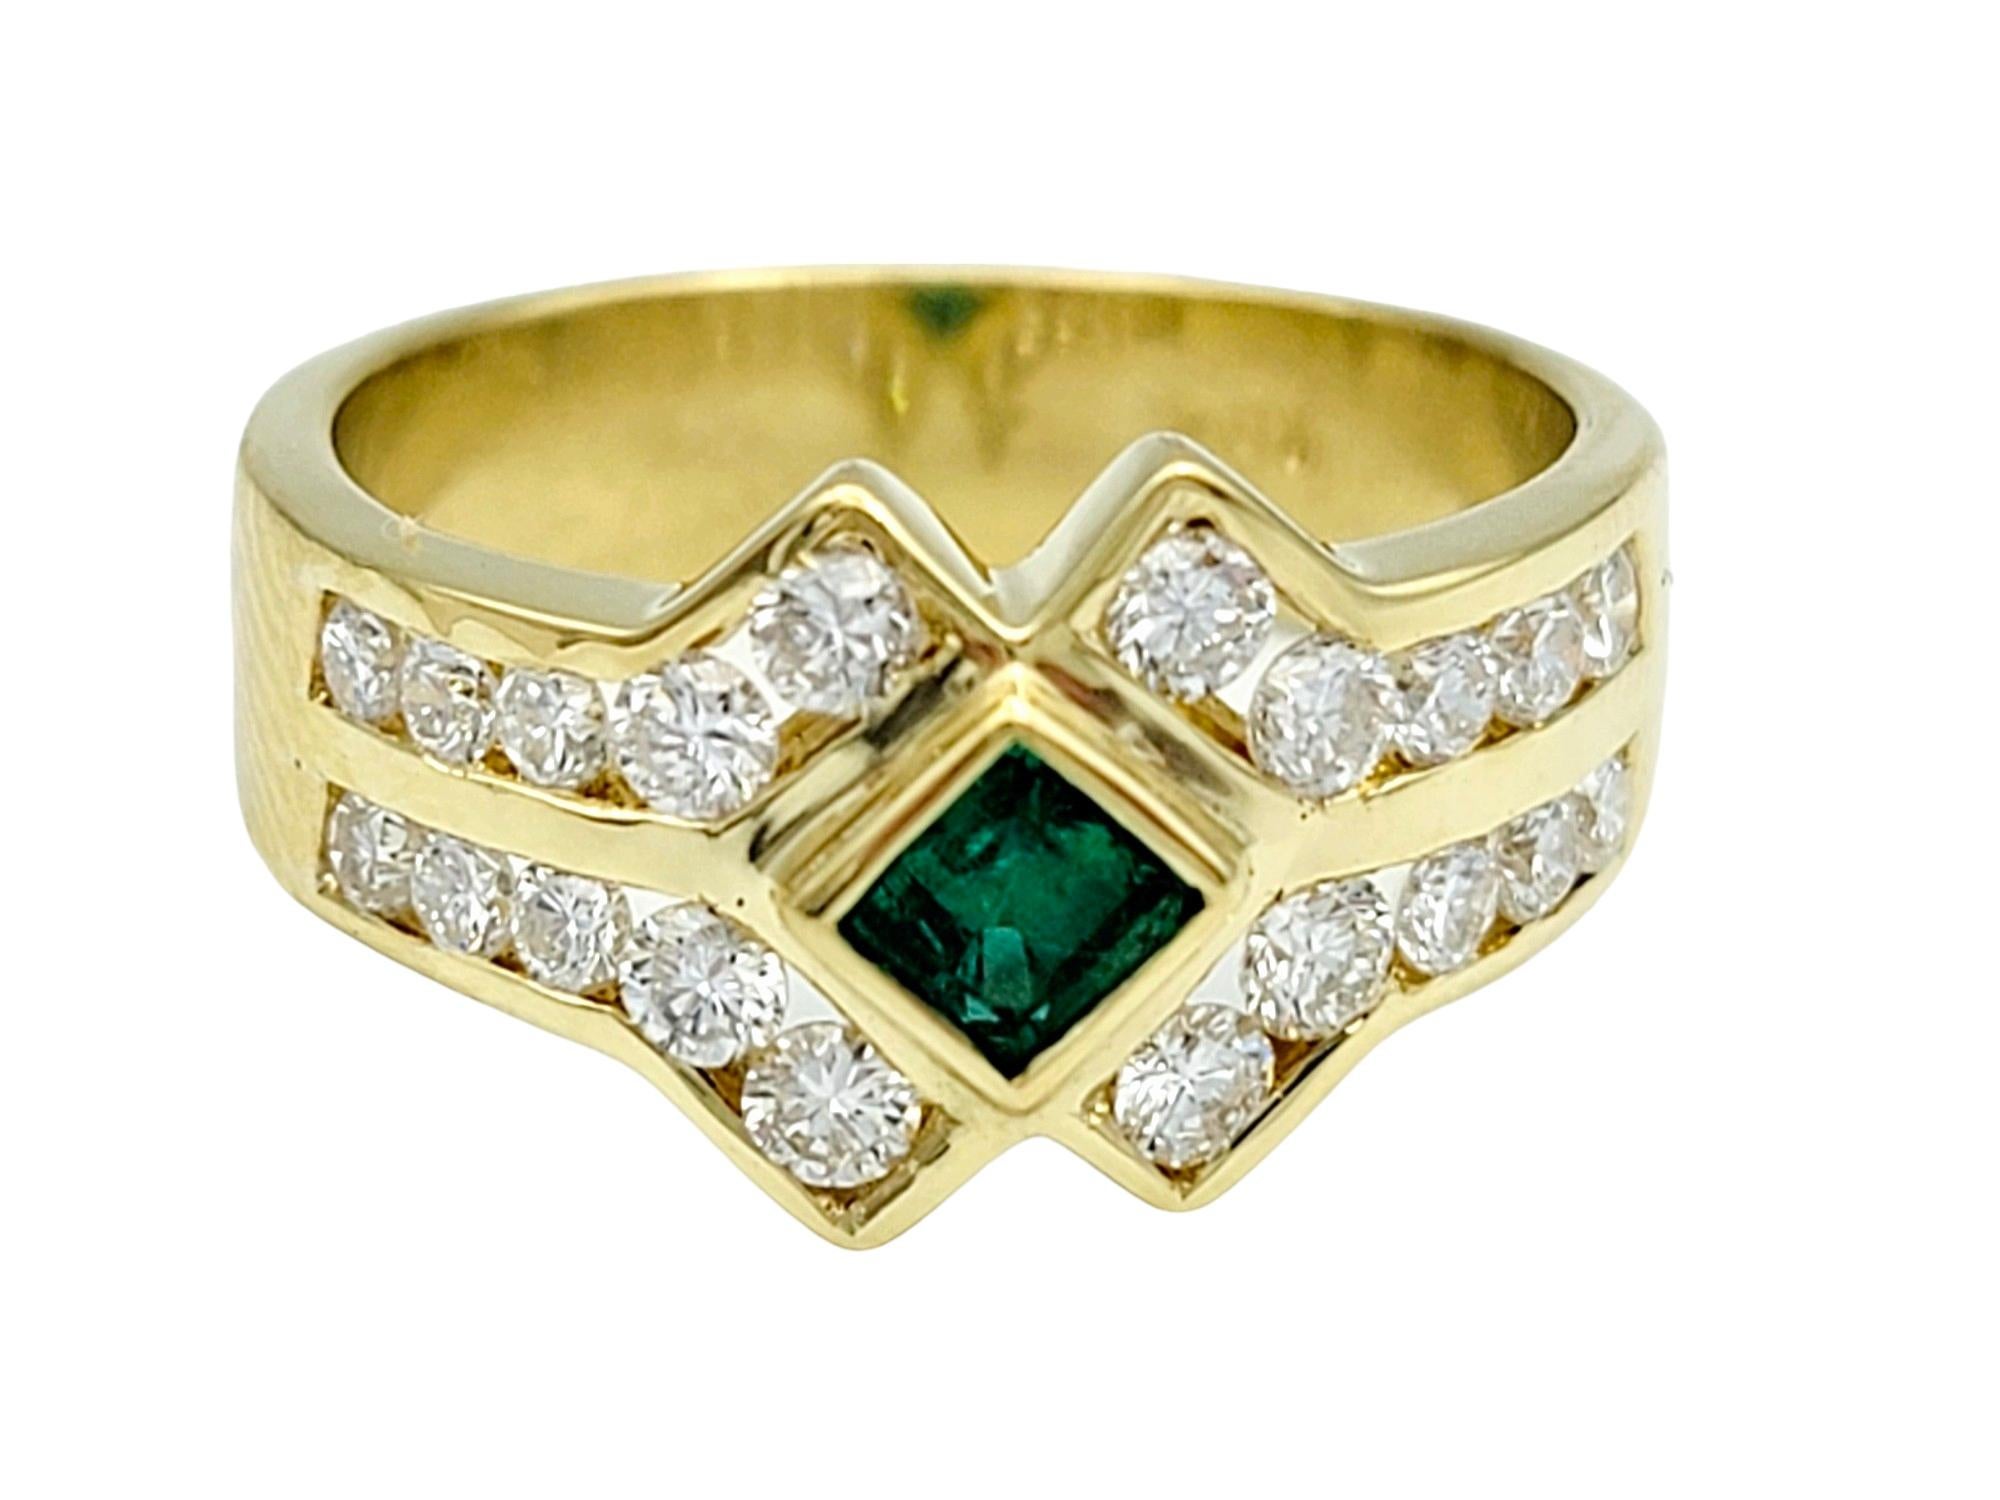 Ring Size: 5.75

This unique emerald and diamond band ring exudes sophistication and elegance. Set in 18 karat yellow gold, it features a striking pairing of a square-cut emerald and sparkling round diamonds. 

With its modern design and luxurious